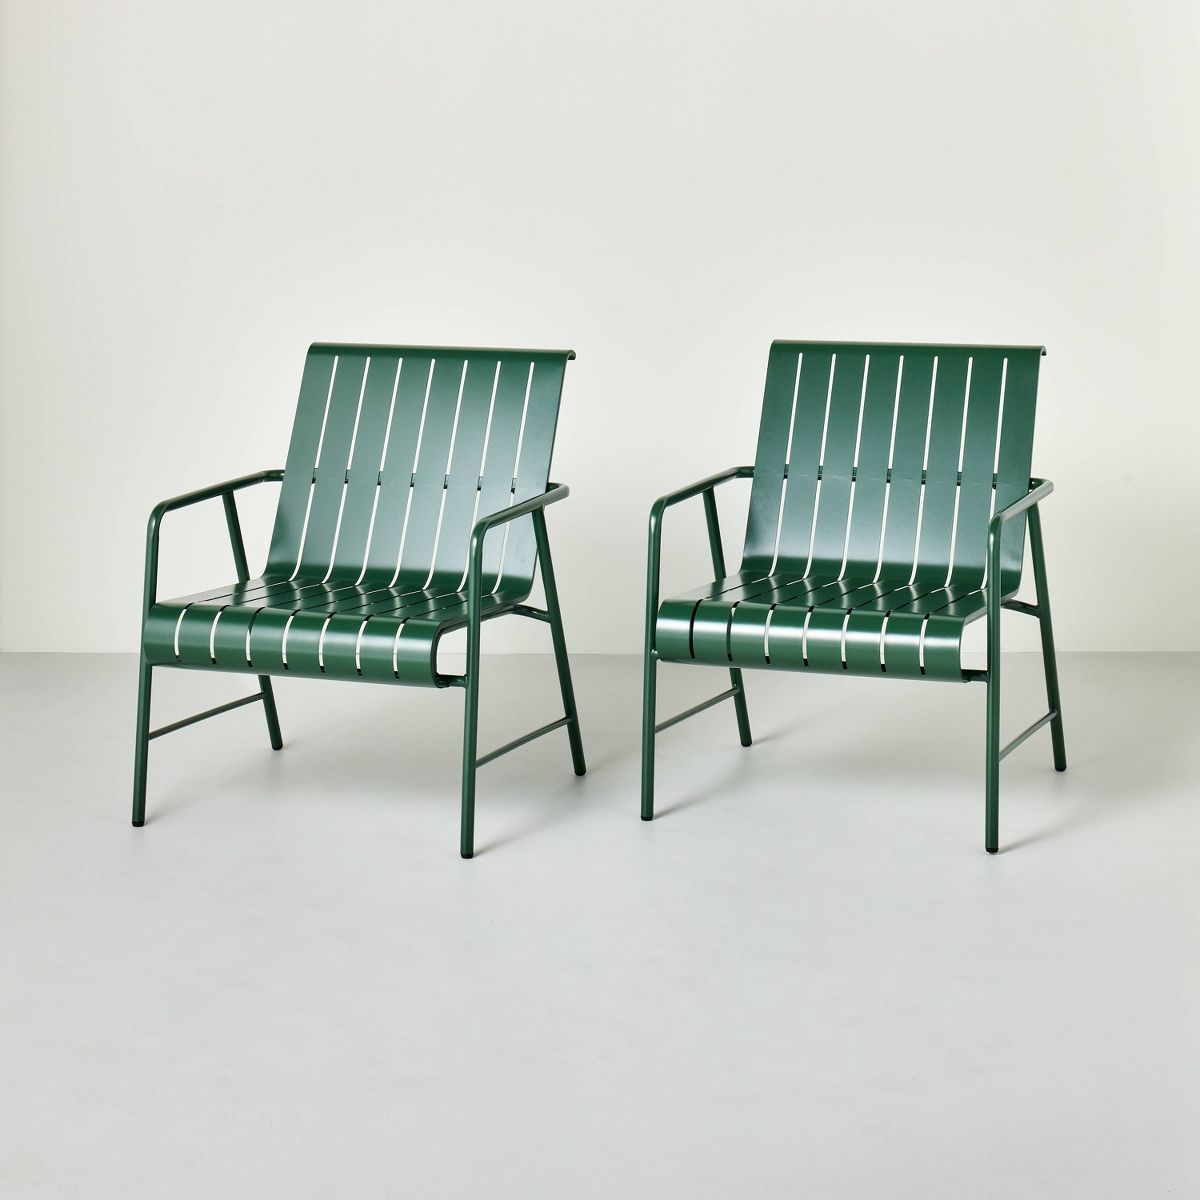 Slat Metal Outdoor Patio Club Chairs (Set of 2) - Green - Hearth & Hand™ with Magnolia | Target